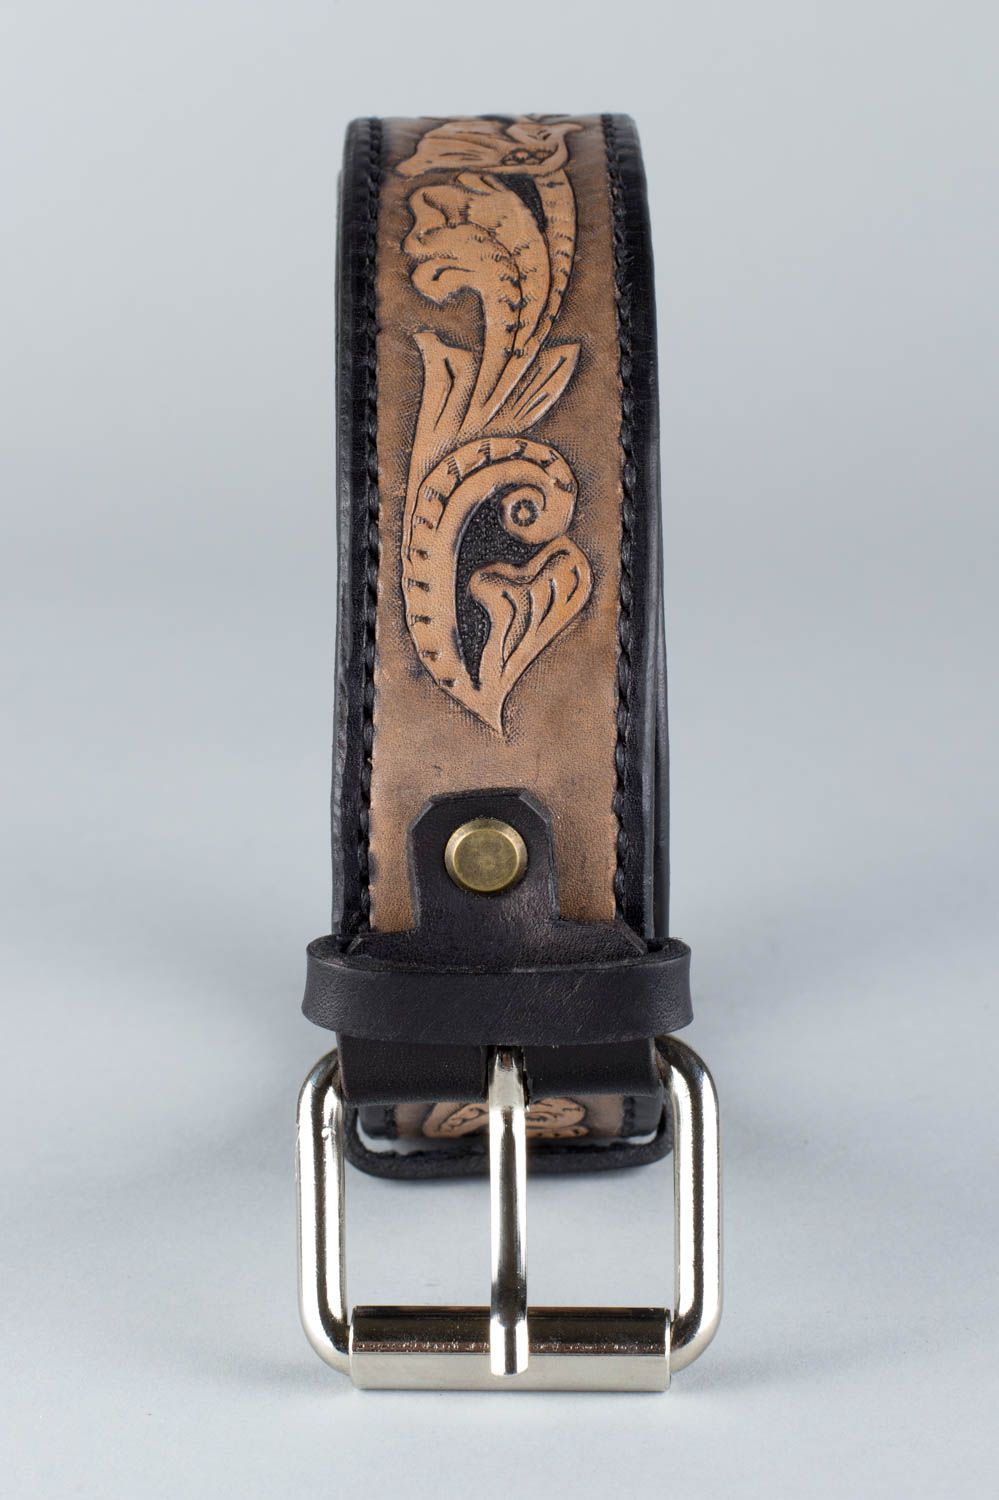 Handmade belt made of natural leather with metal buckle in Sheridan style photo 2